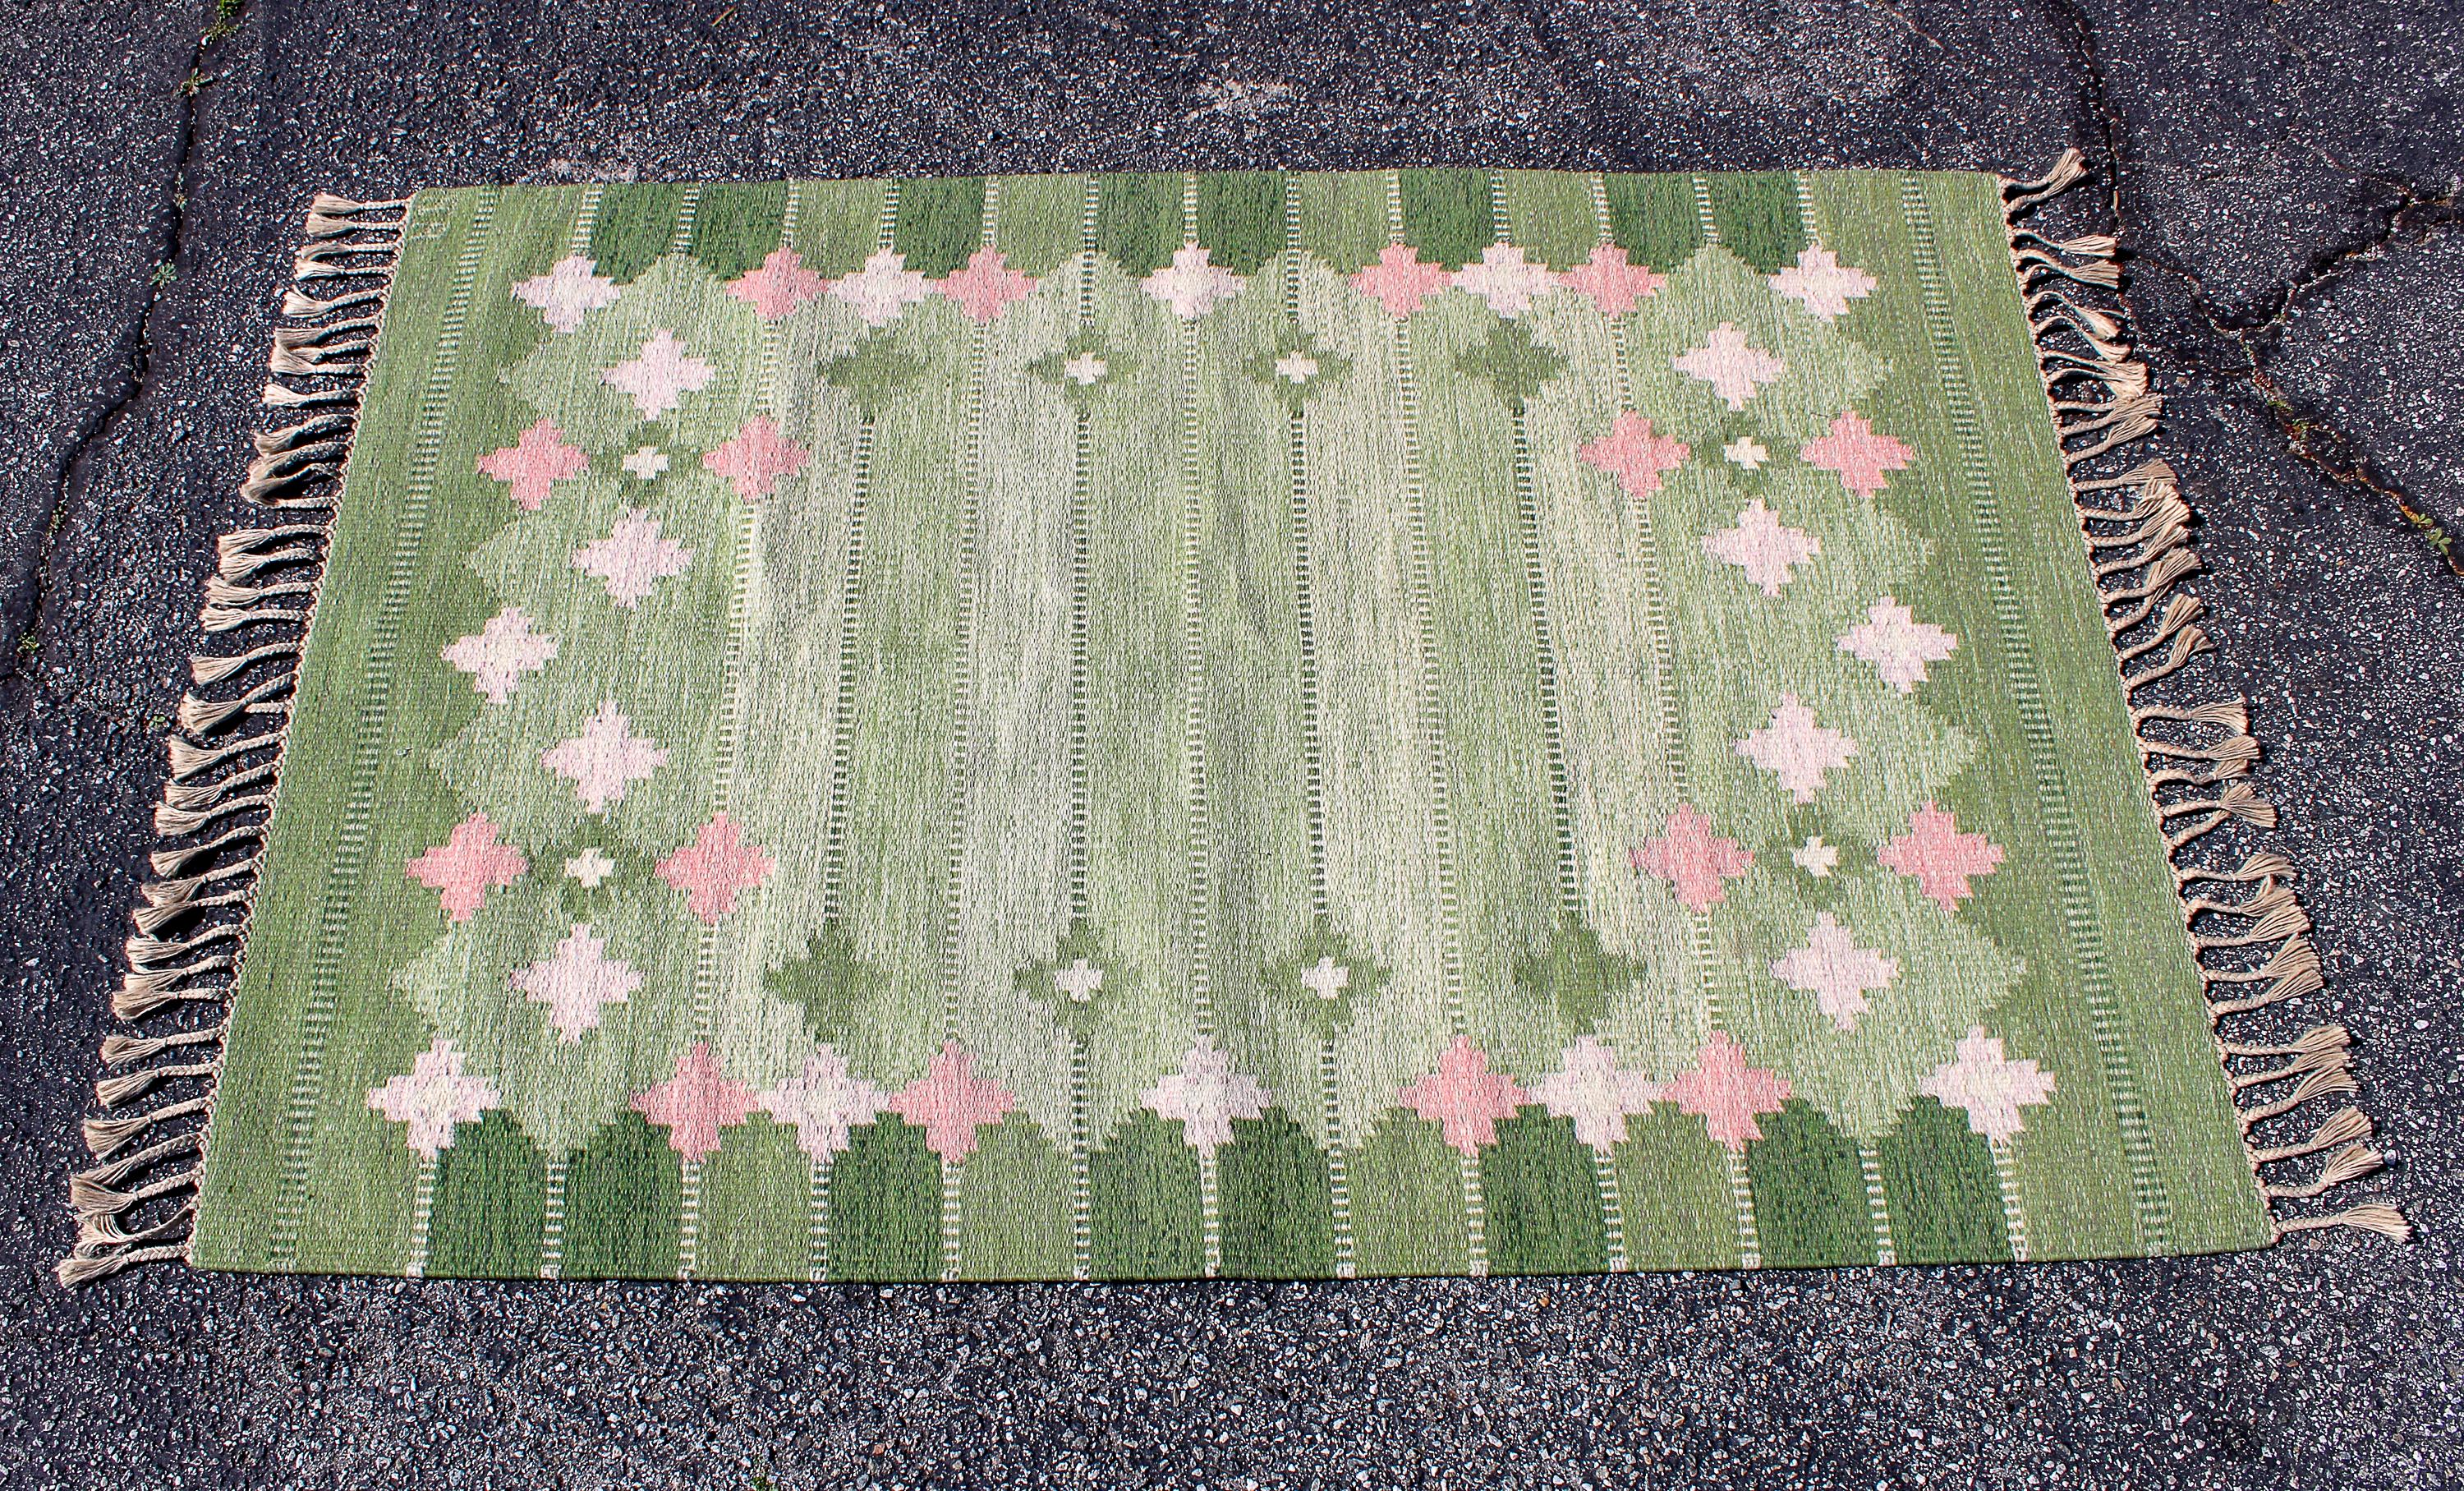 A midcentury Swedish flat-weave carpet (Röllakan) with a green base and geometrical patterns. The carpet is signed AB. Very good vintage condition with signs of usage consistent with age and use.